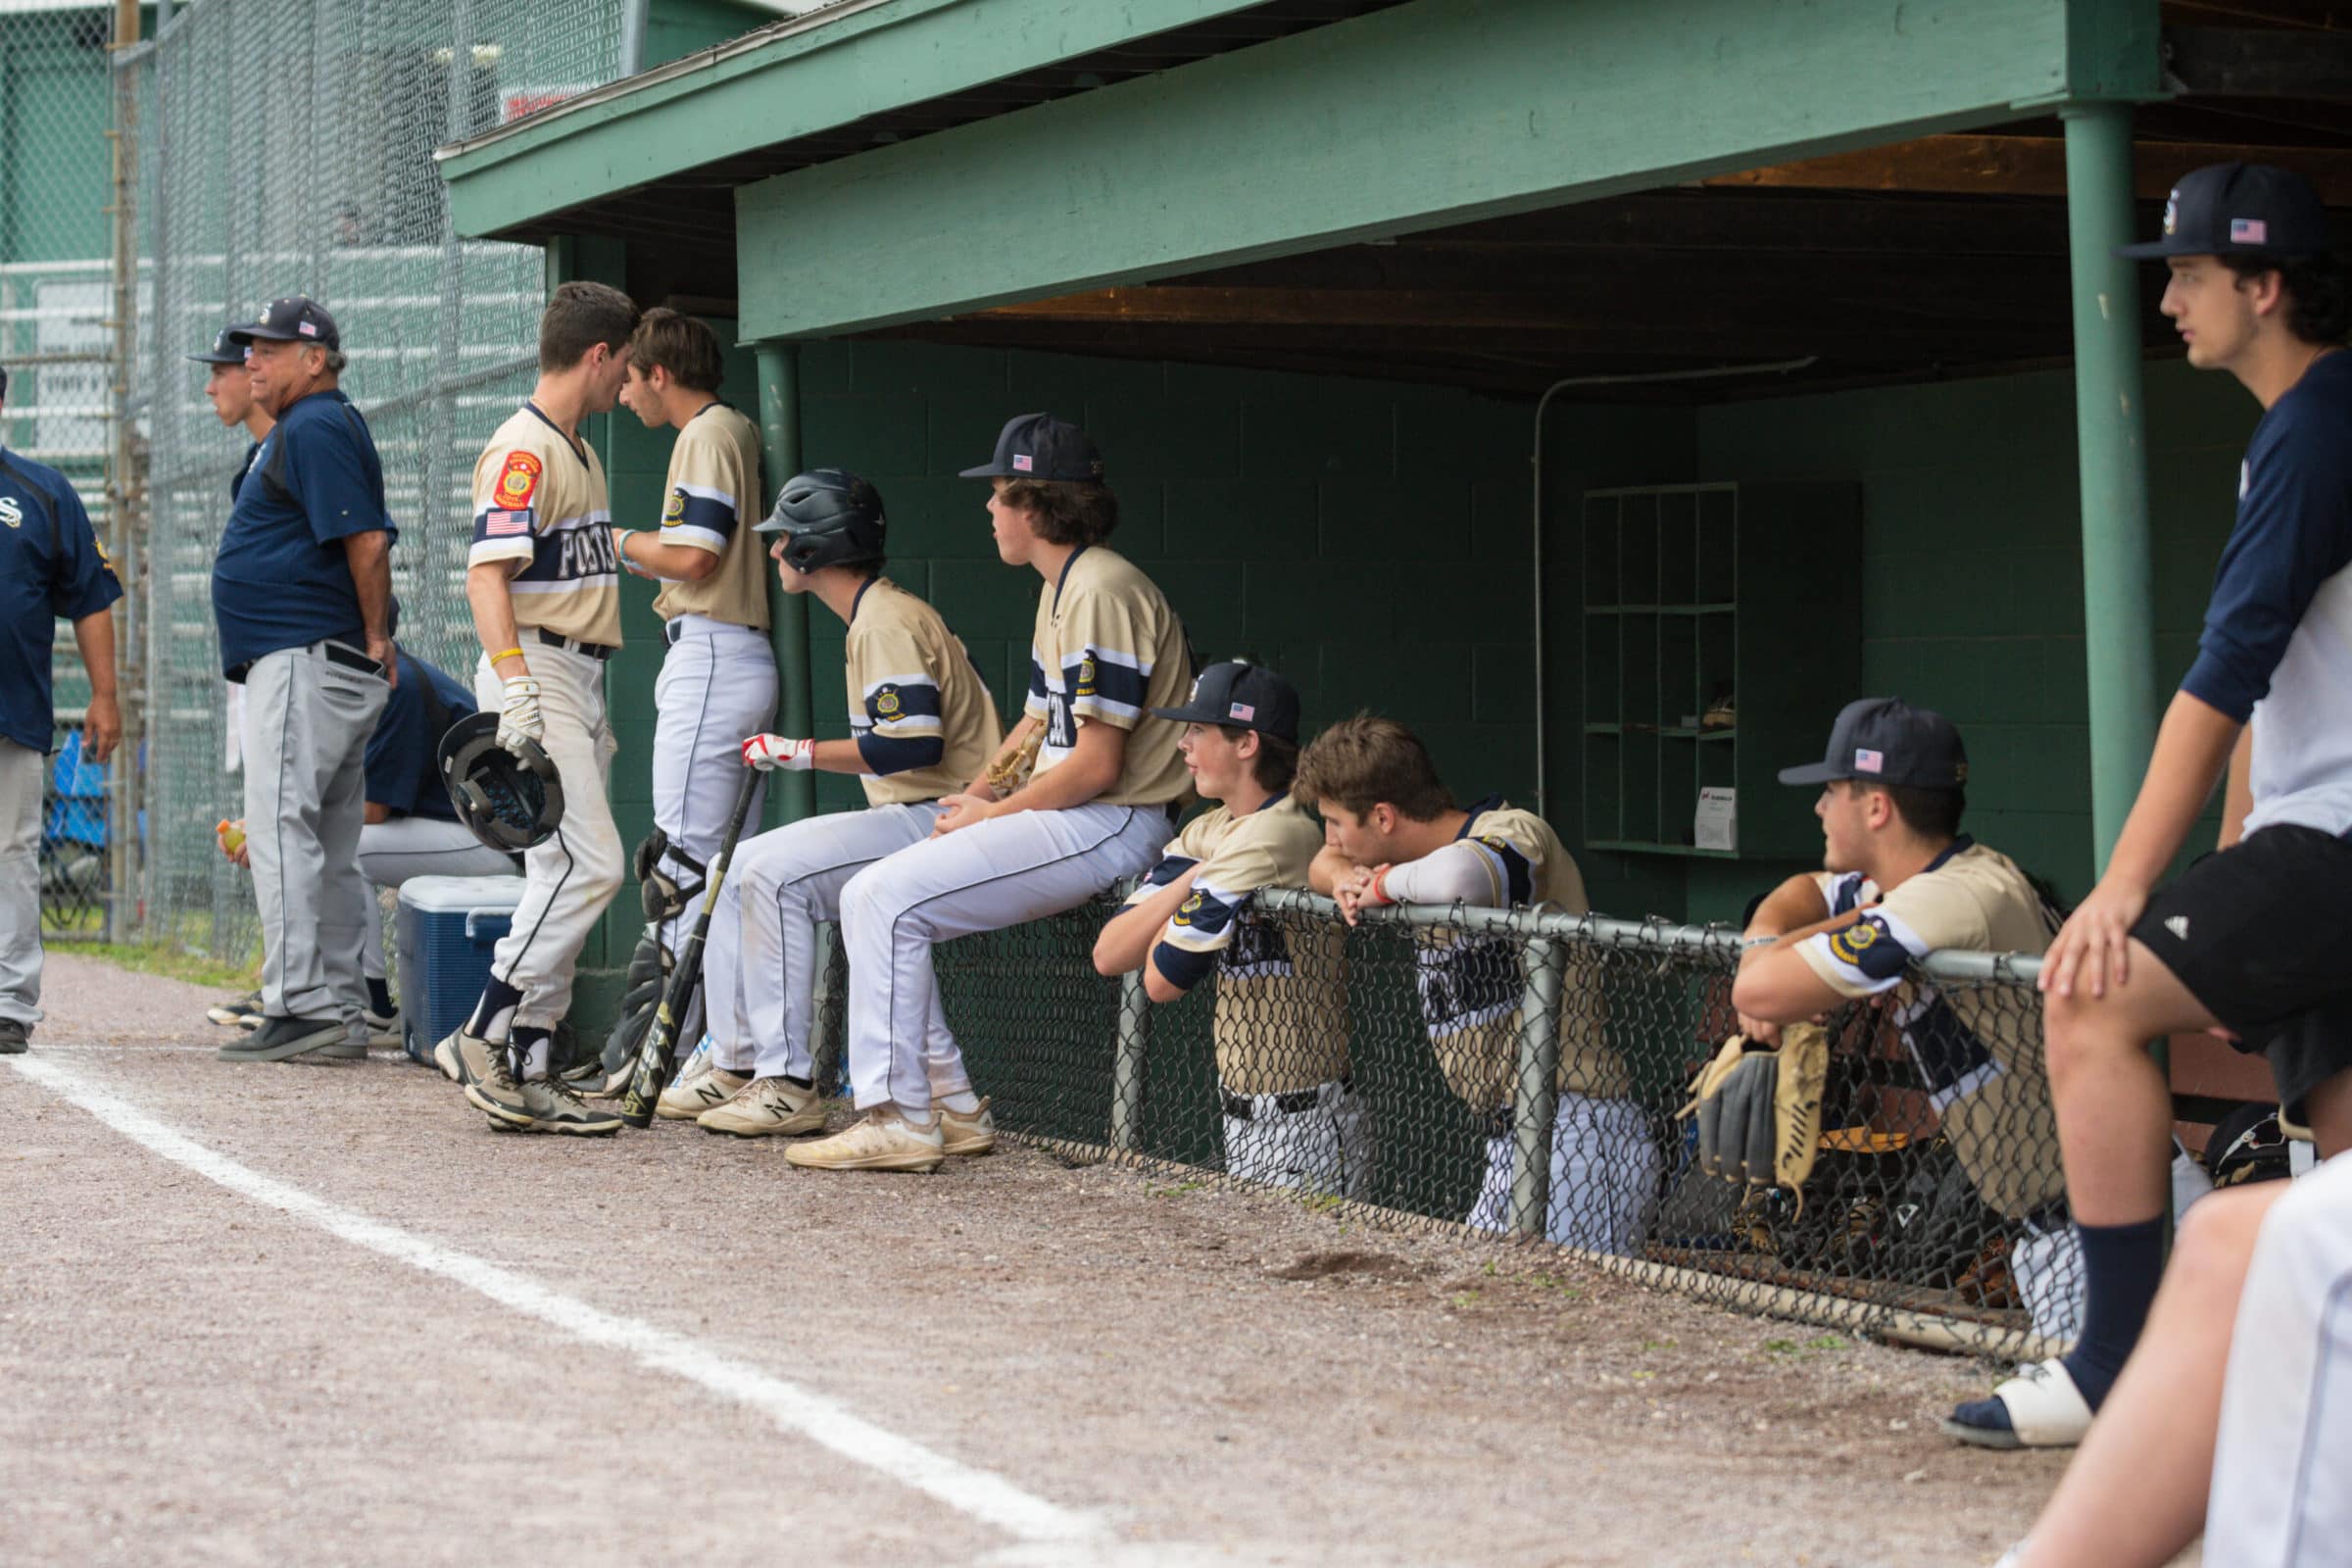 Shrewsbury players look on during their team’s game against Milford. (Photo/Jesse Kucewicz)